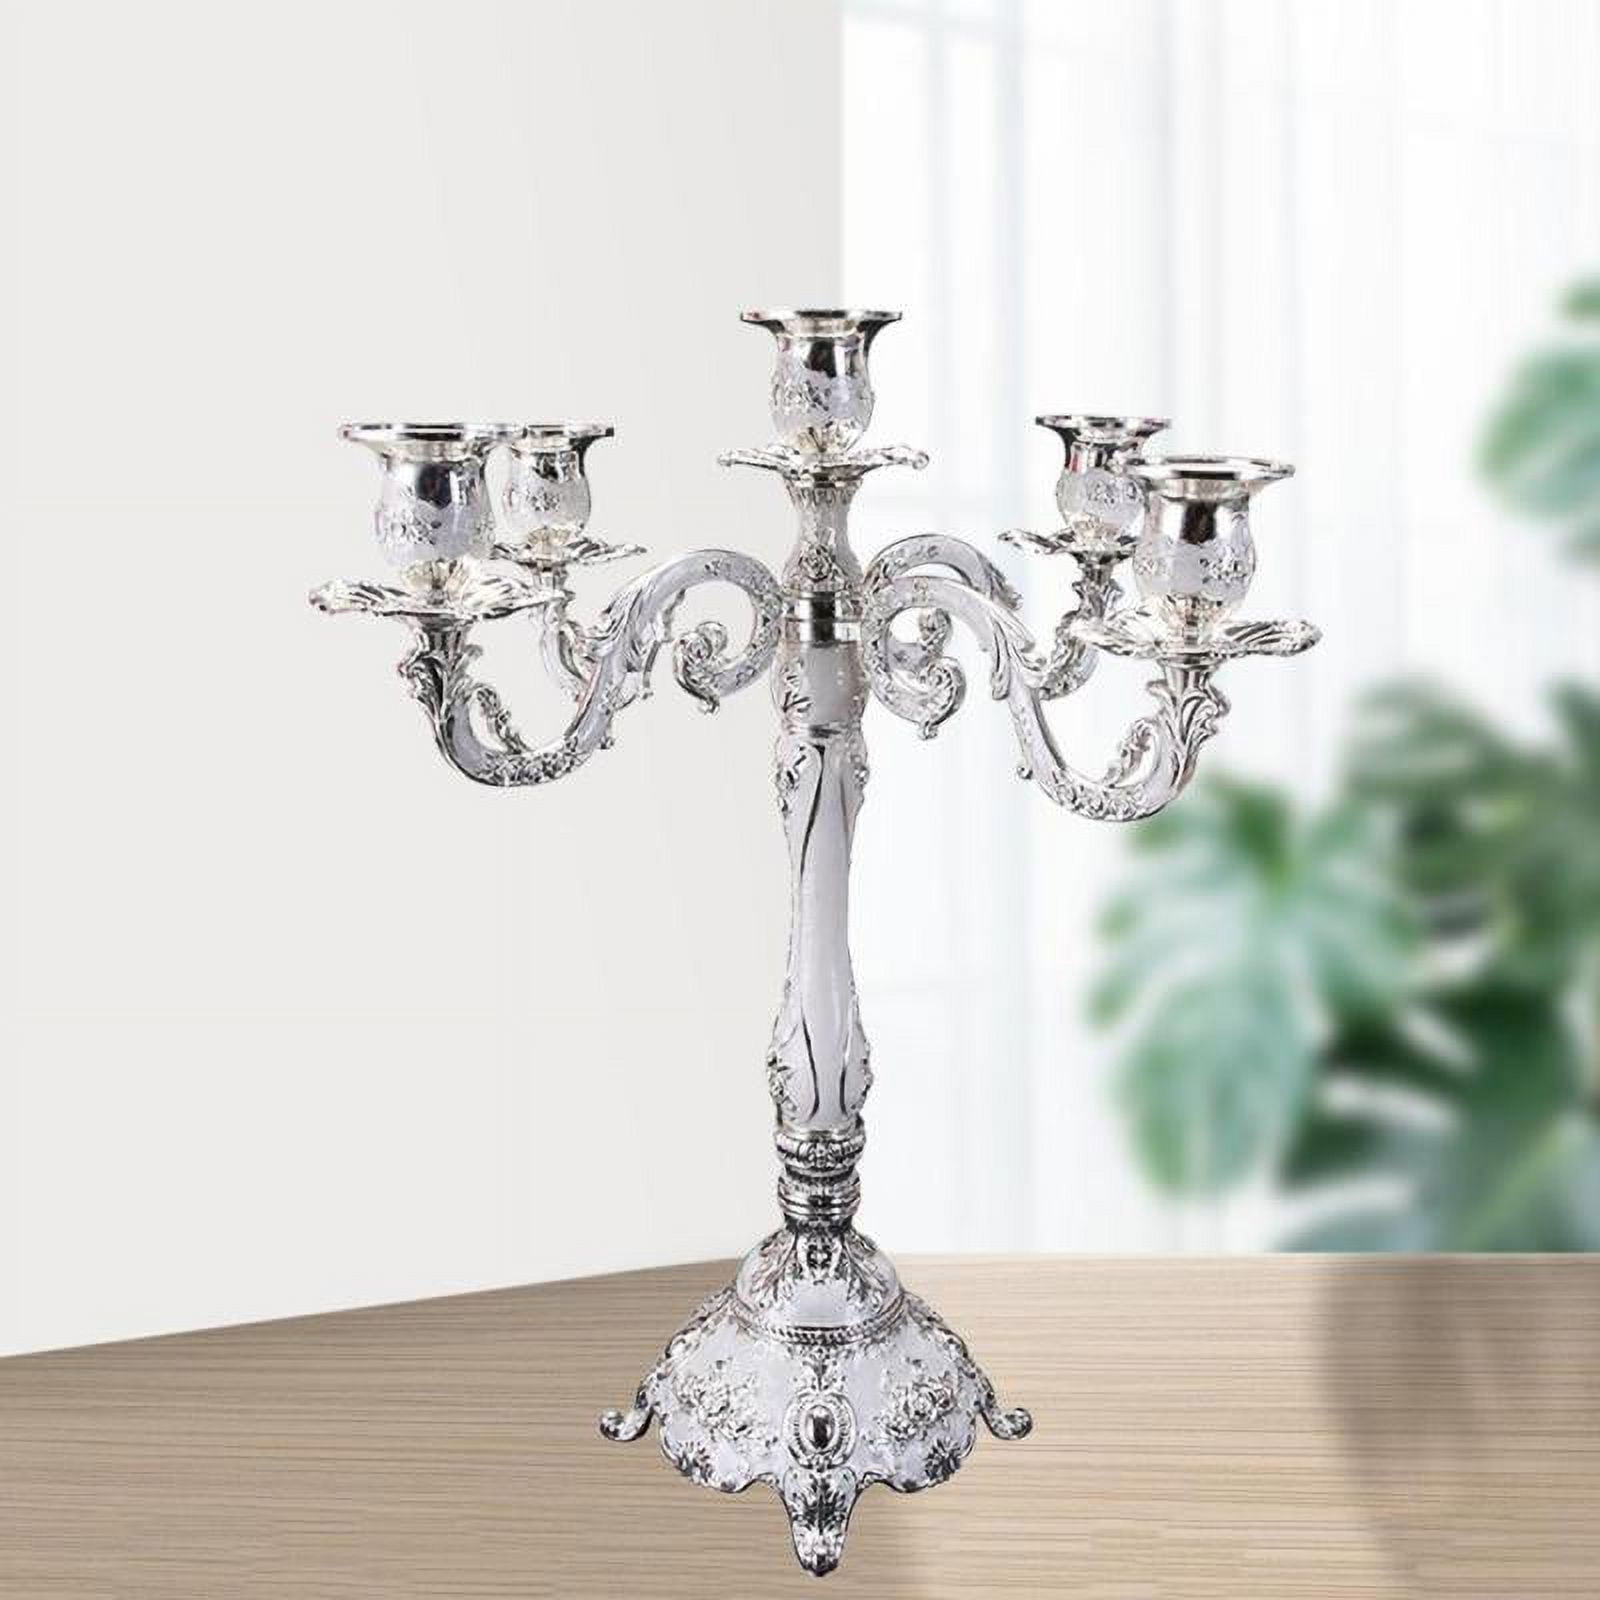  BOOMLATU Shabby Chic Crown Candle Holder Stand,Metal